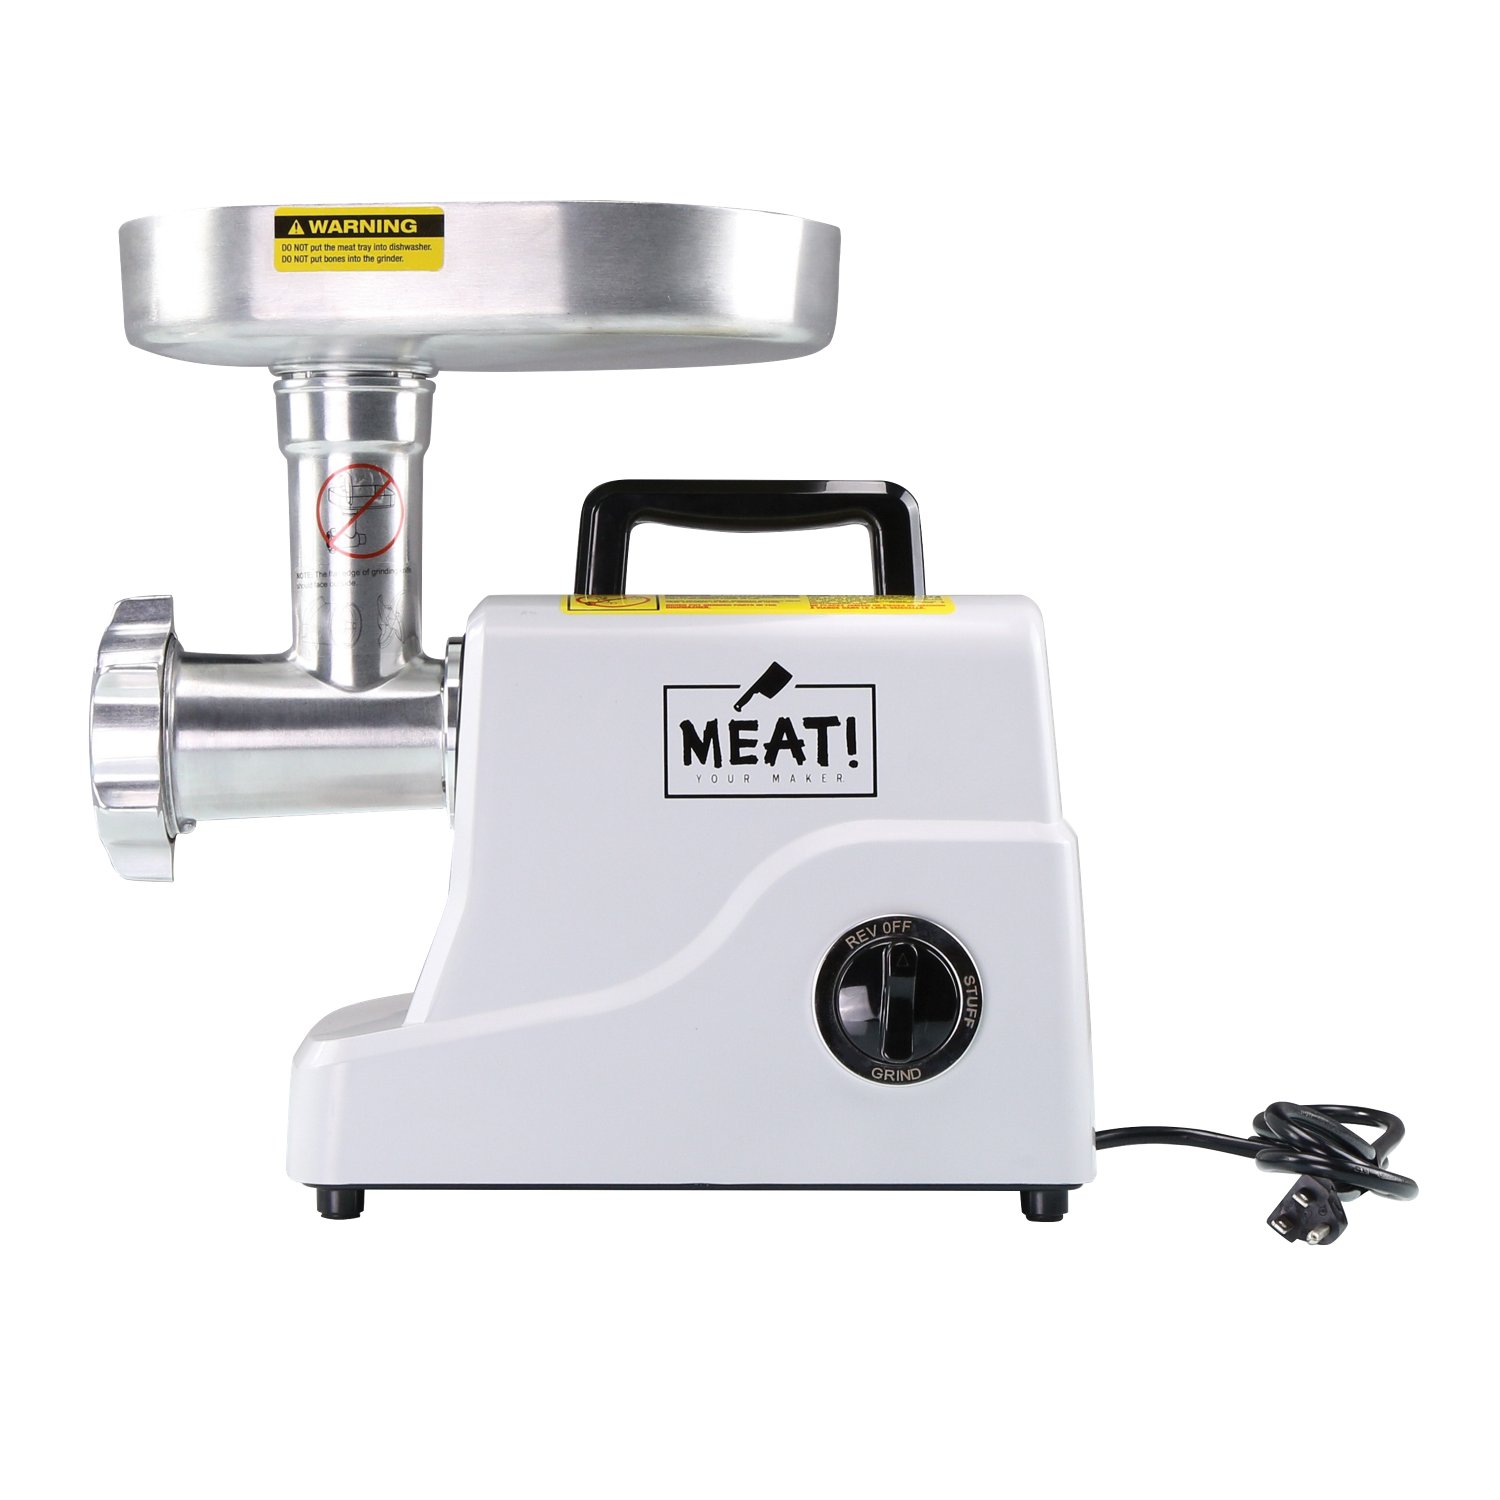 Meat 0.5HP #8 Grinder - Food Processing at Academy Sports